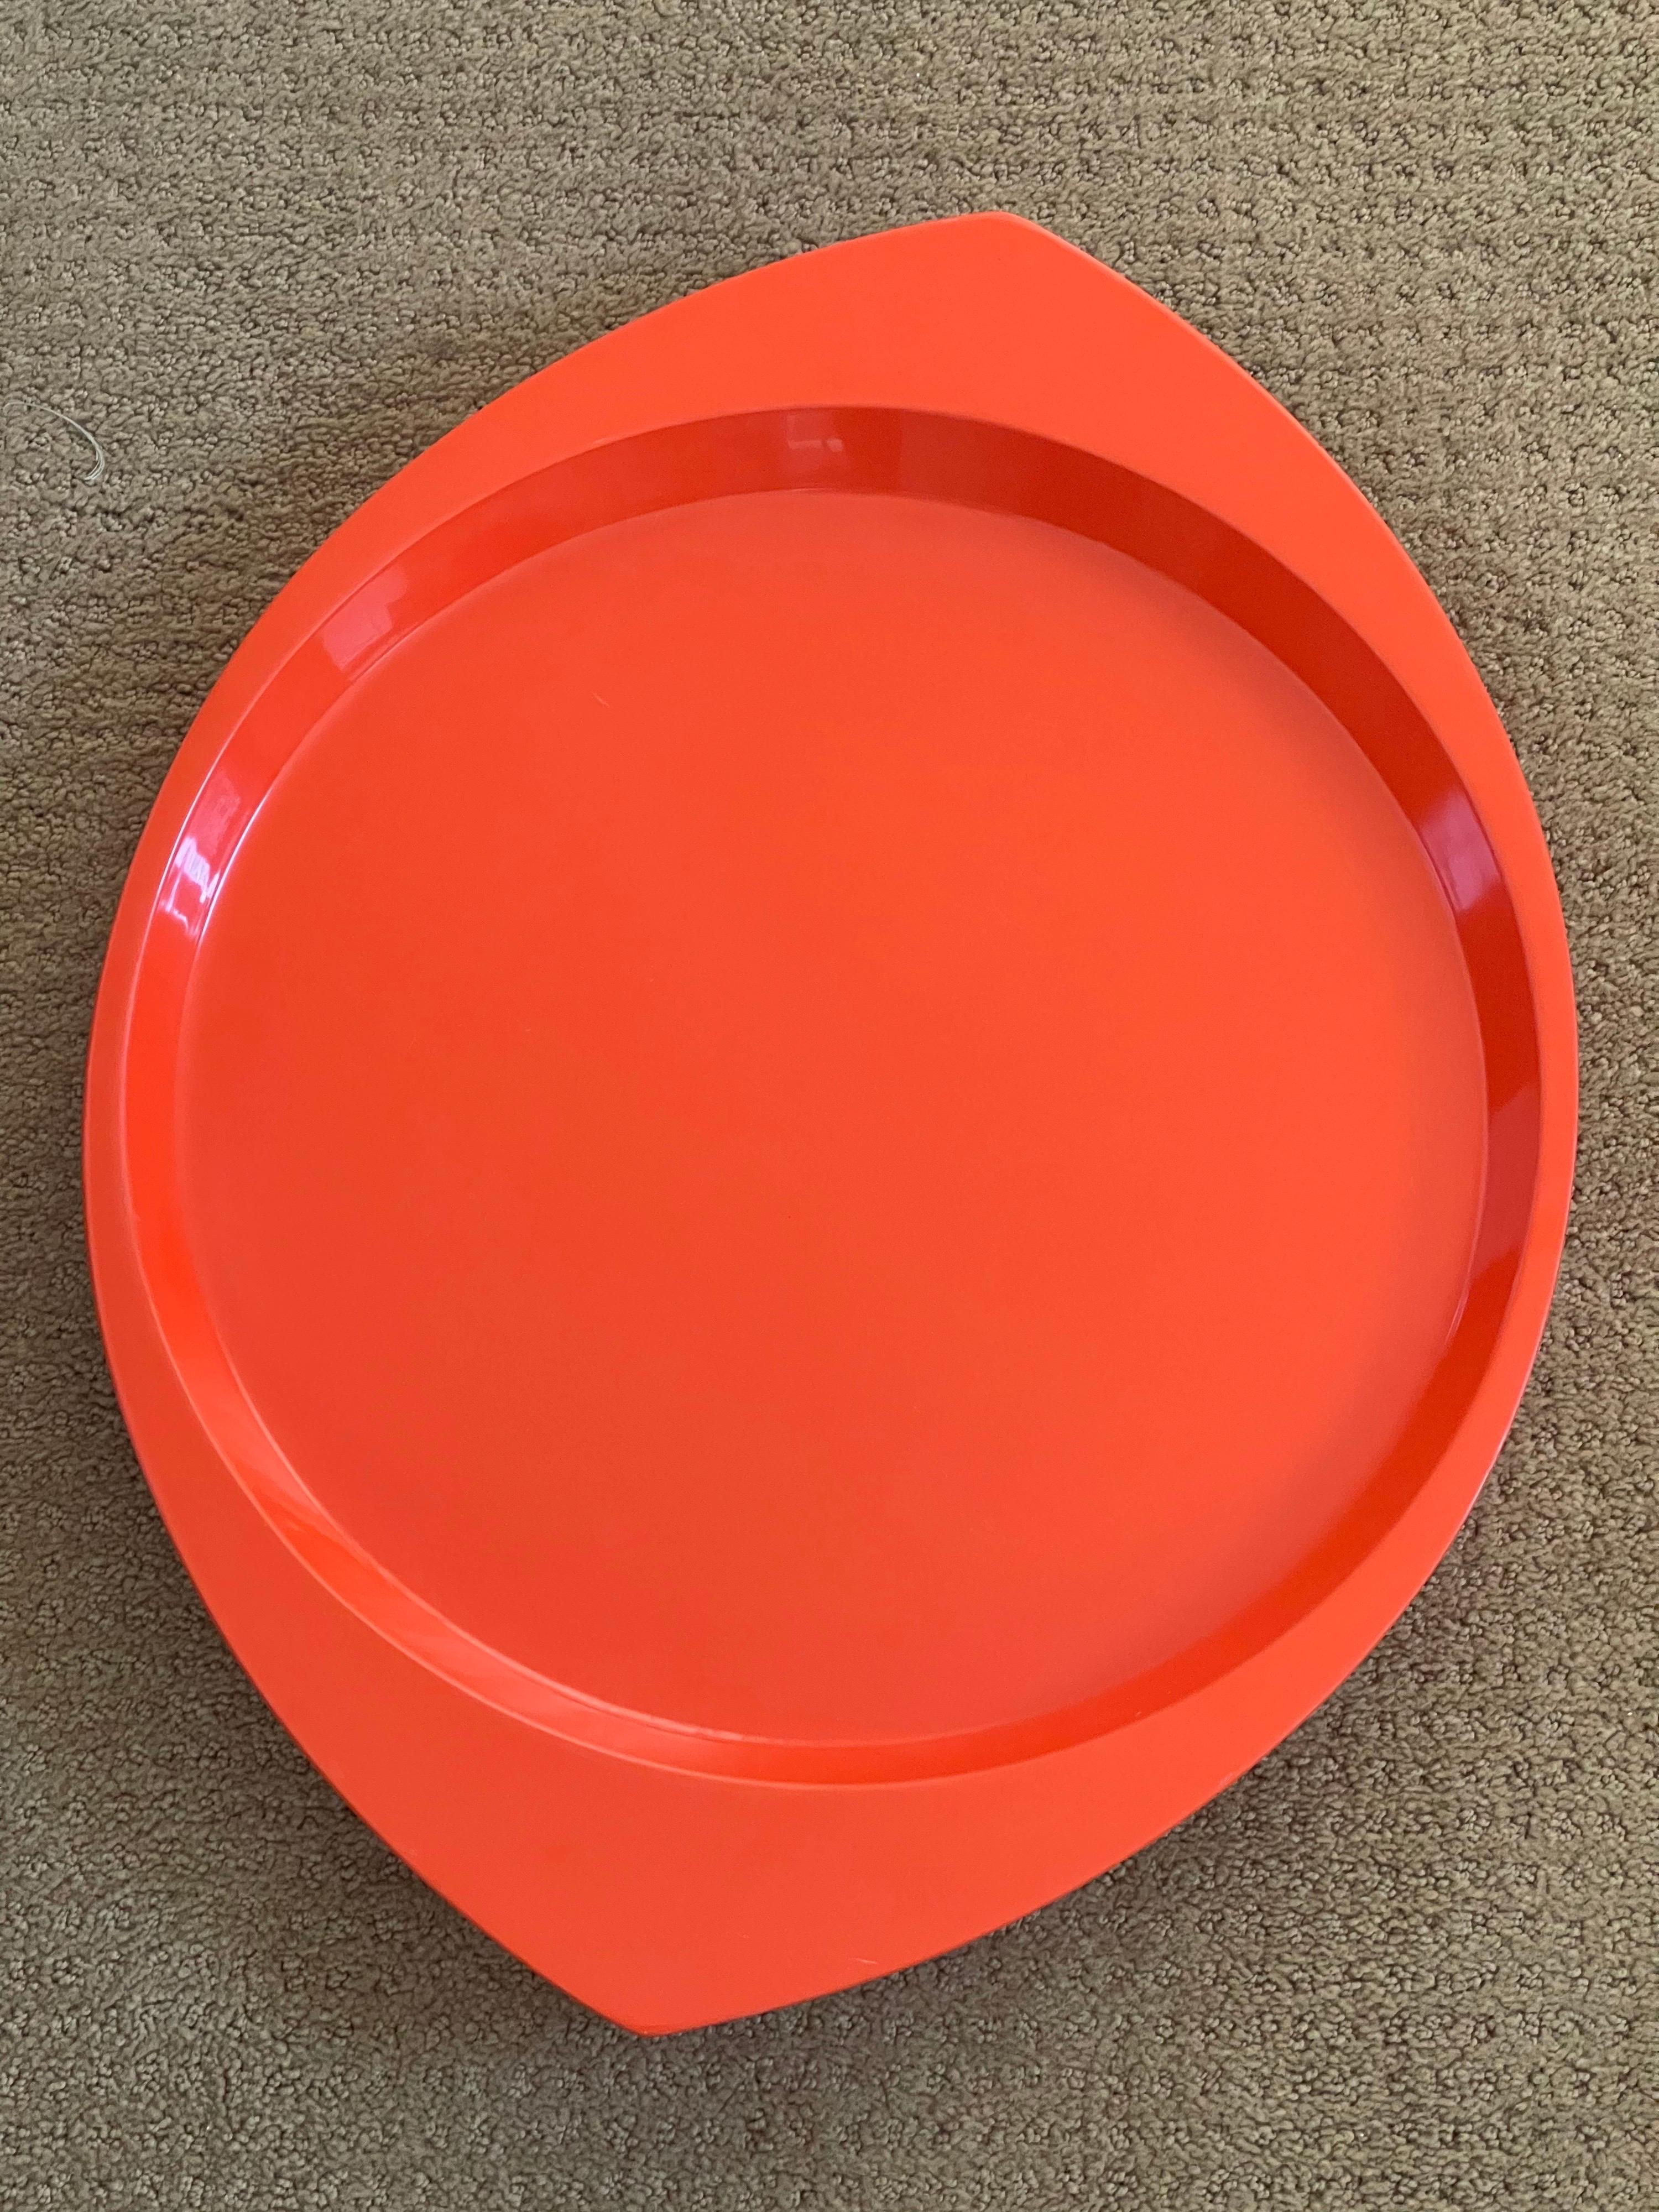 Large oval shaped orange lacquer tray by Jens Quistgaard for Dansk, circa 1950s (early production). Original condition with raised edges and elegant lines; the tray measures is 22